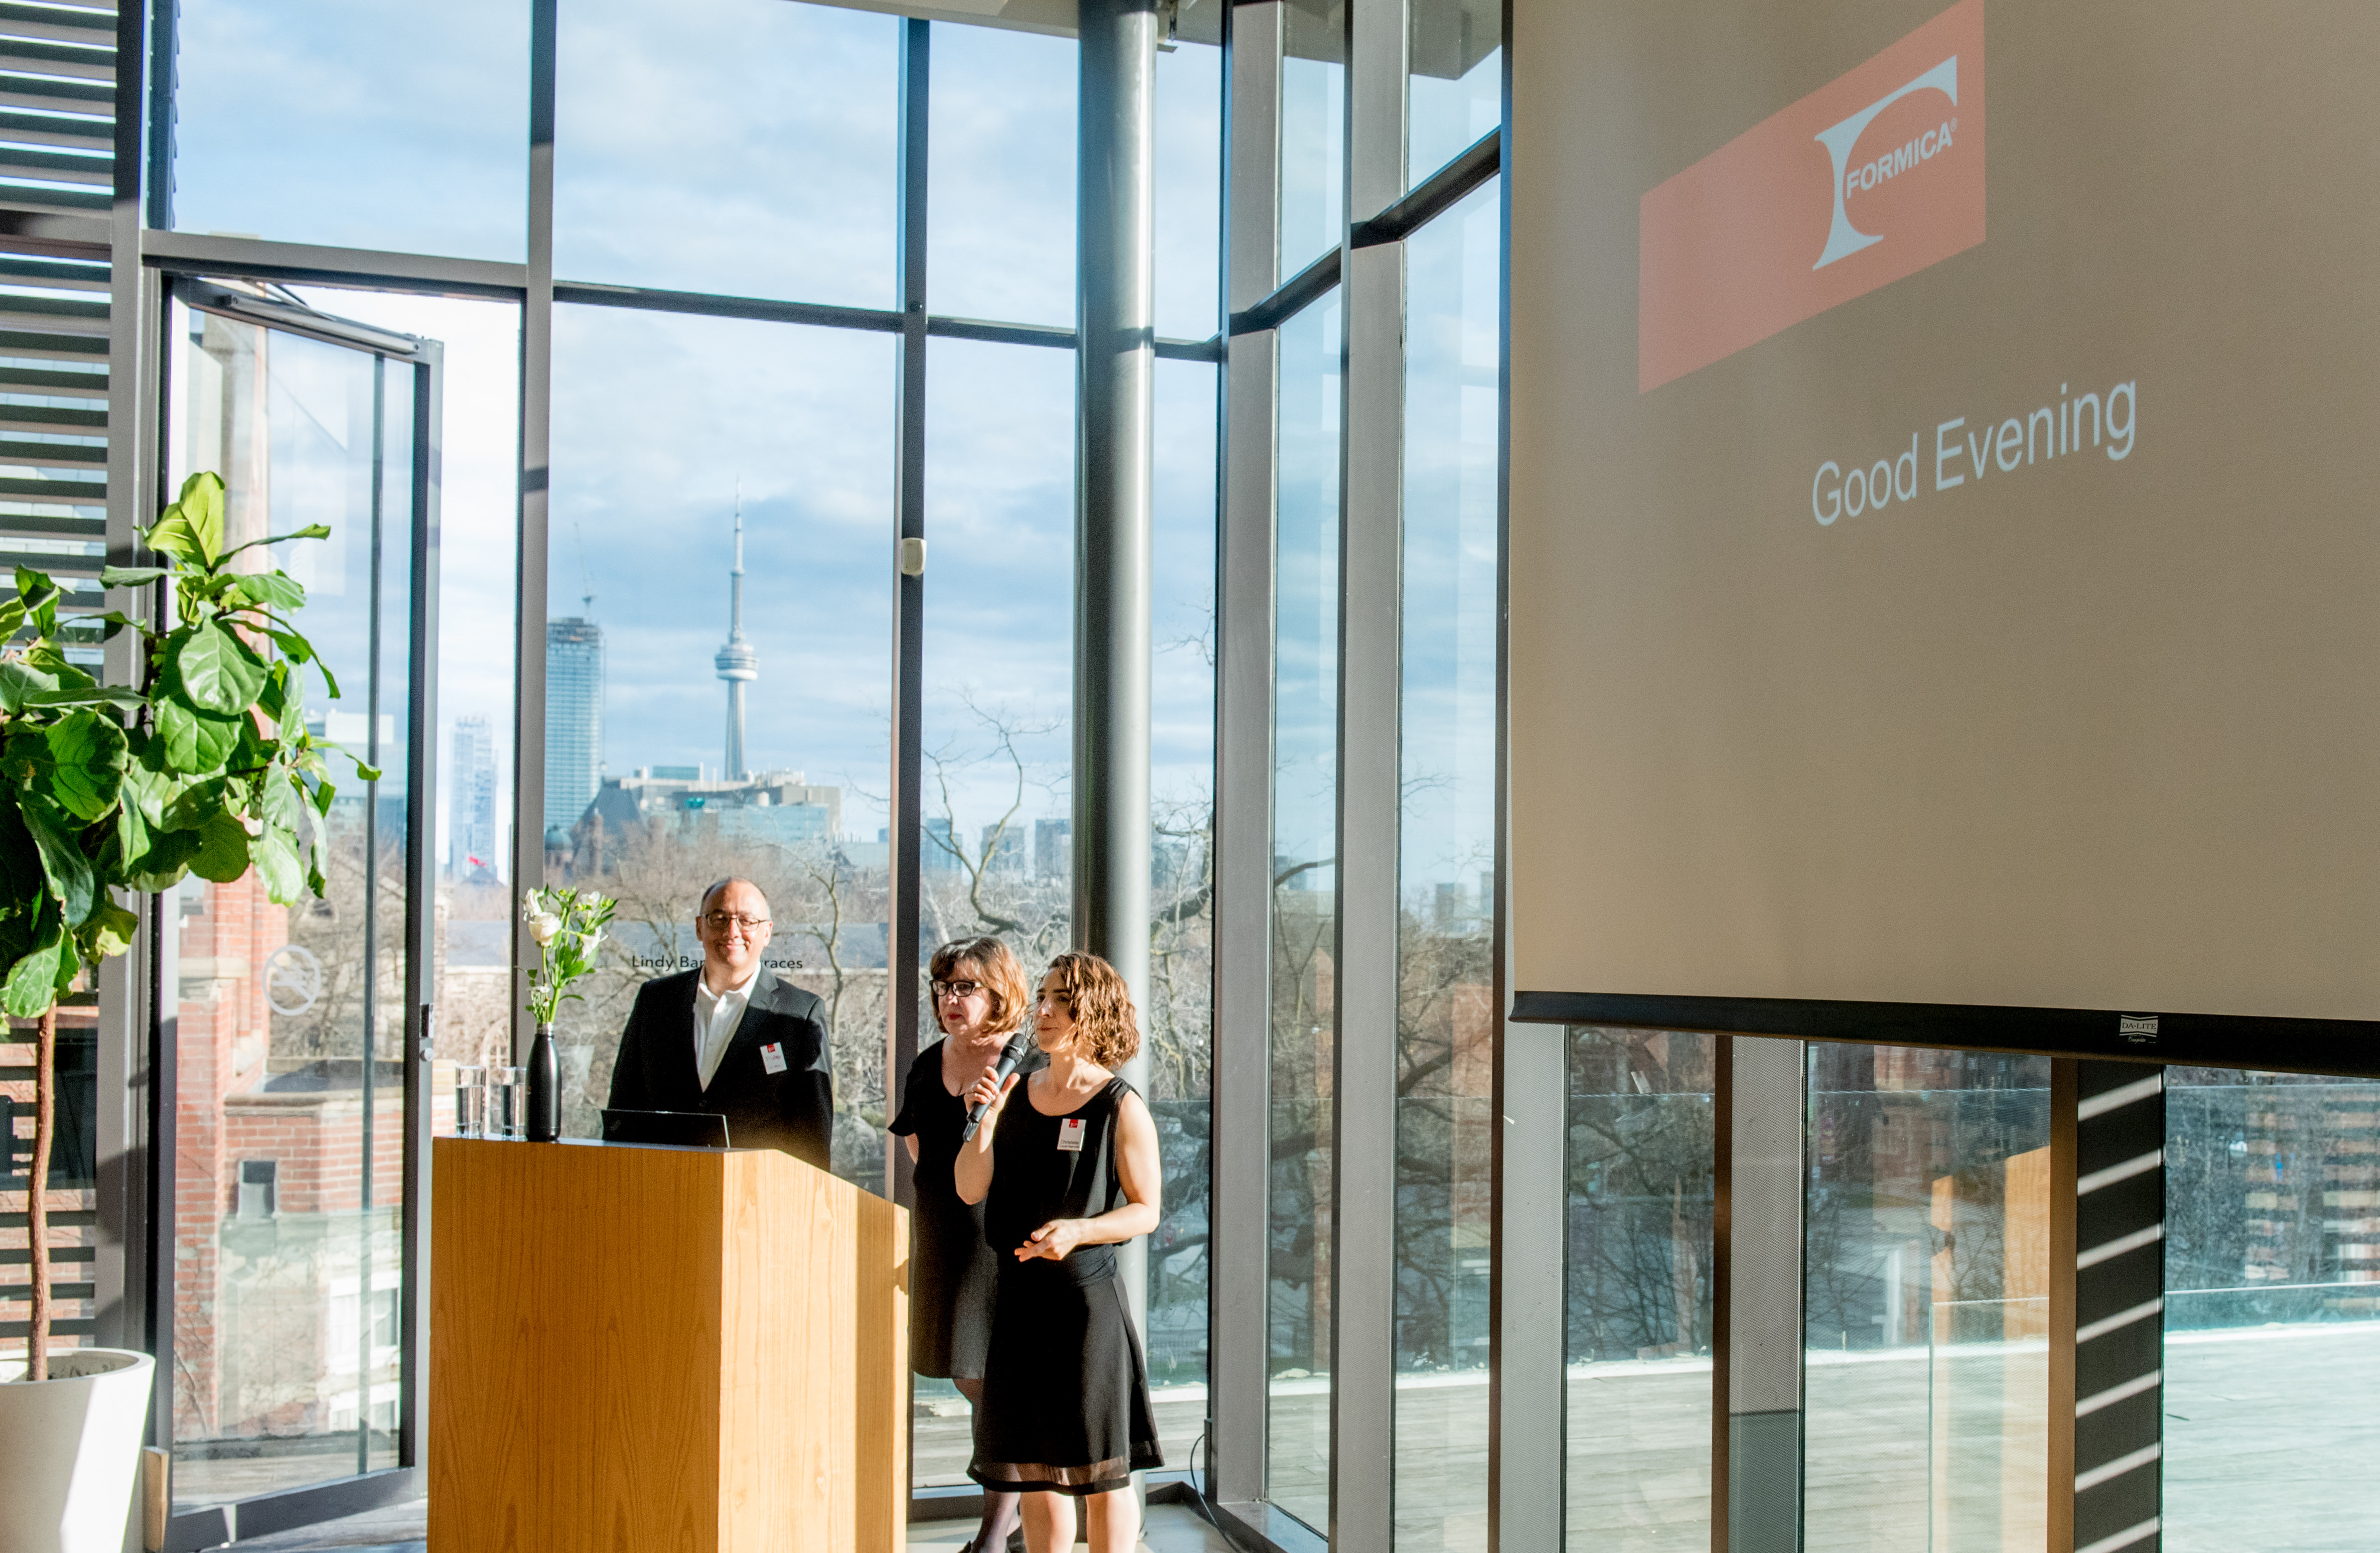 The Official Formica Canada Inc. Launch Evening in Toronto at the Gardiner Museum